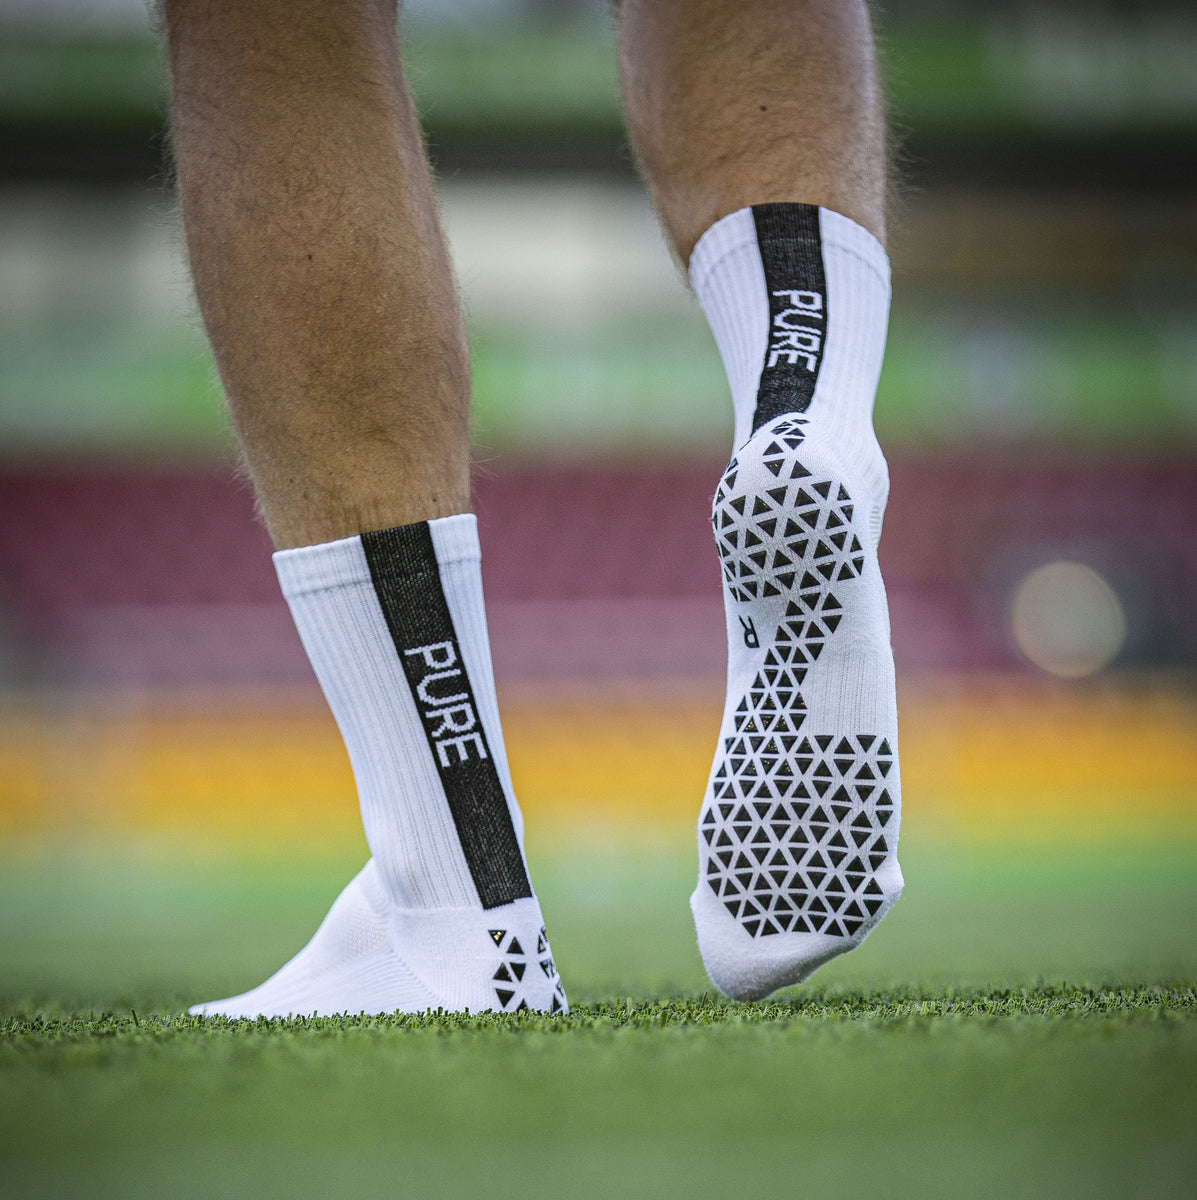 Soccer World Victoria, BC Canada Pure Grip Socks available here